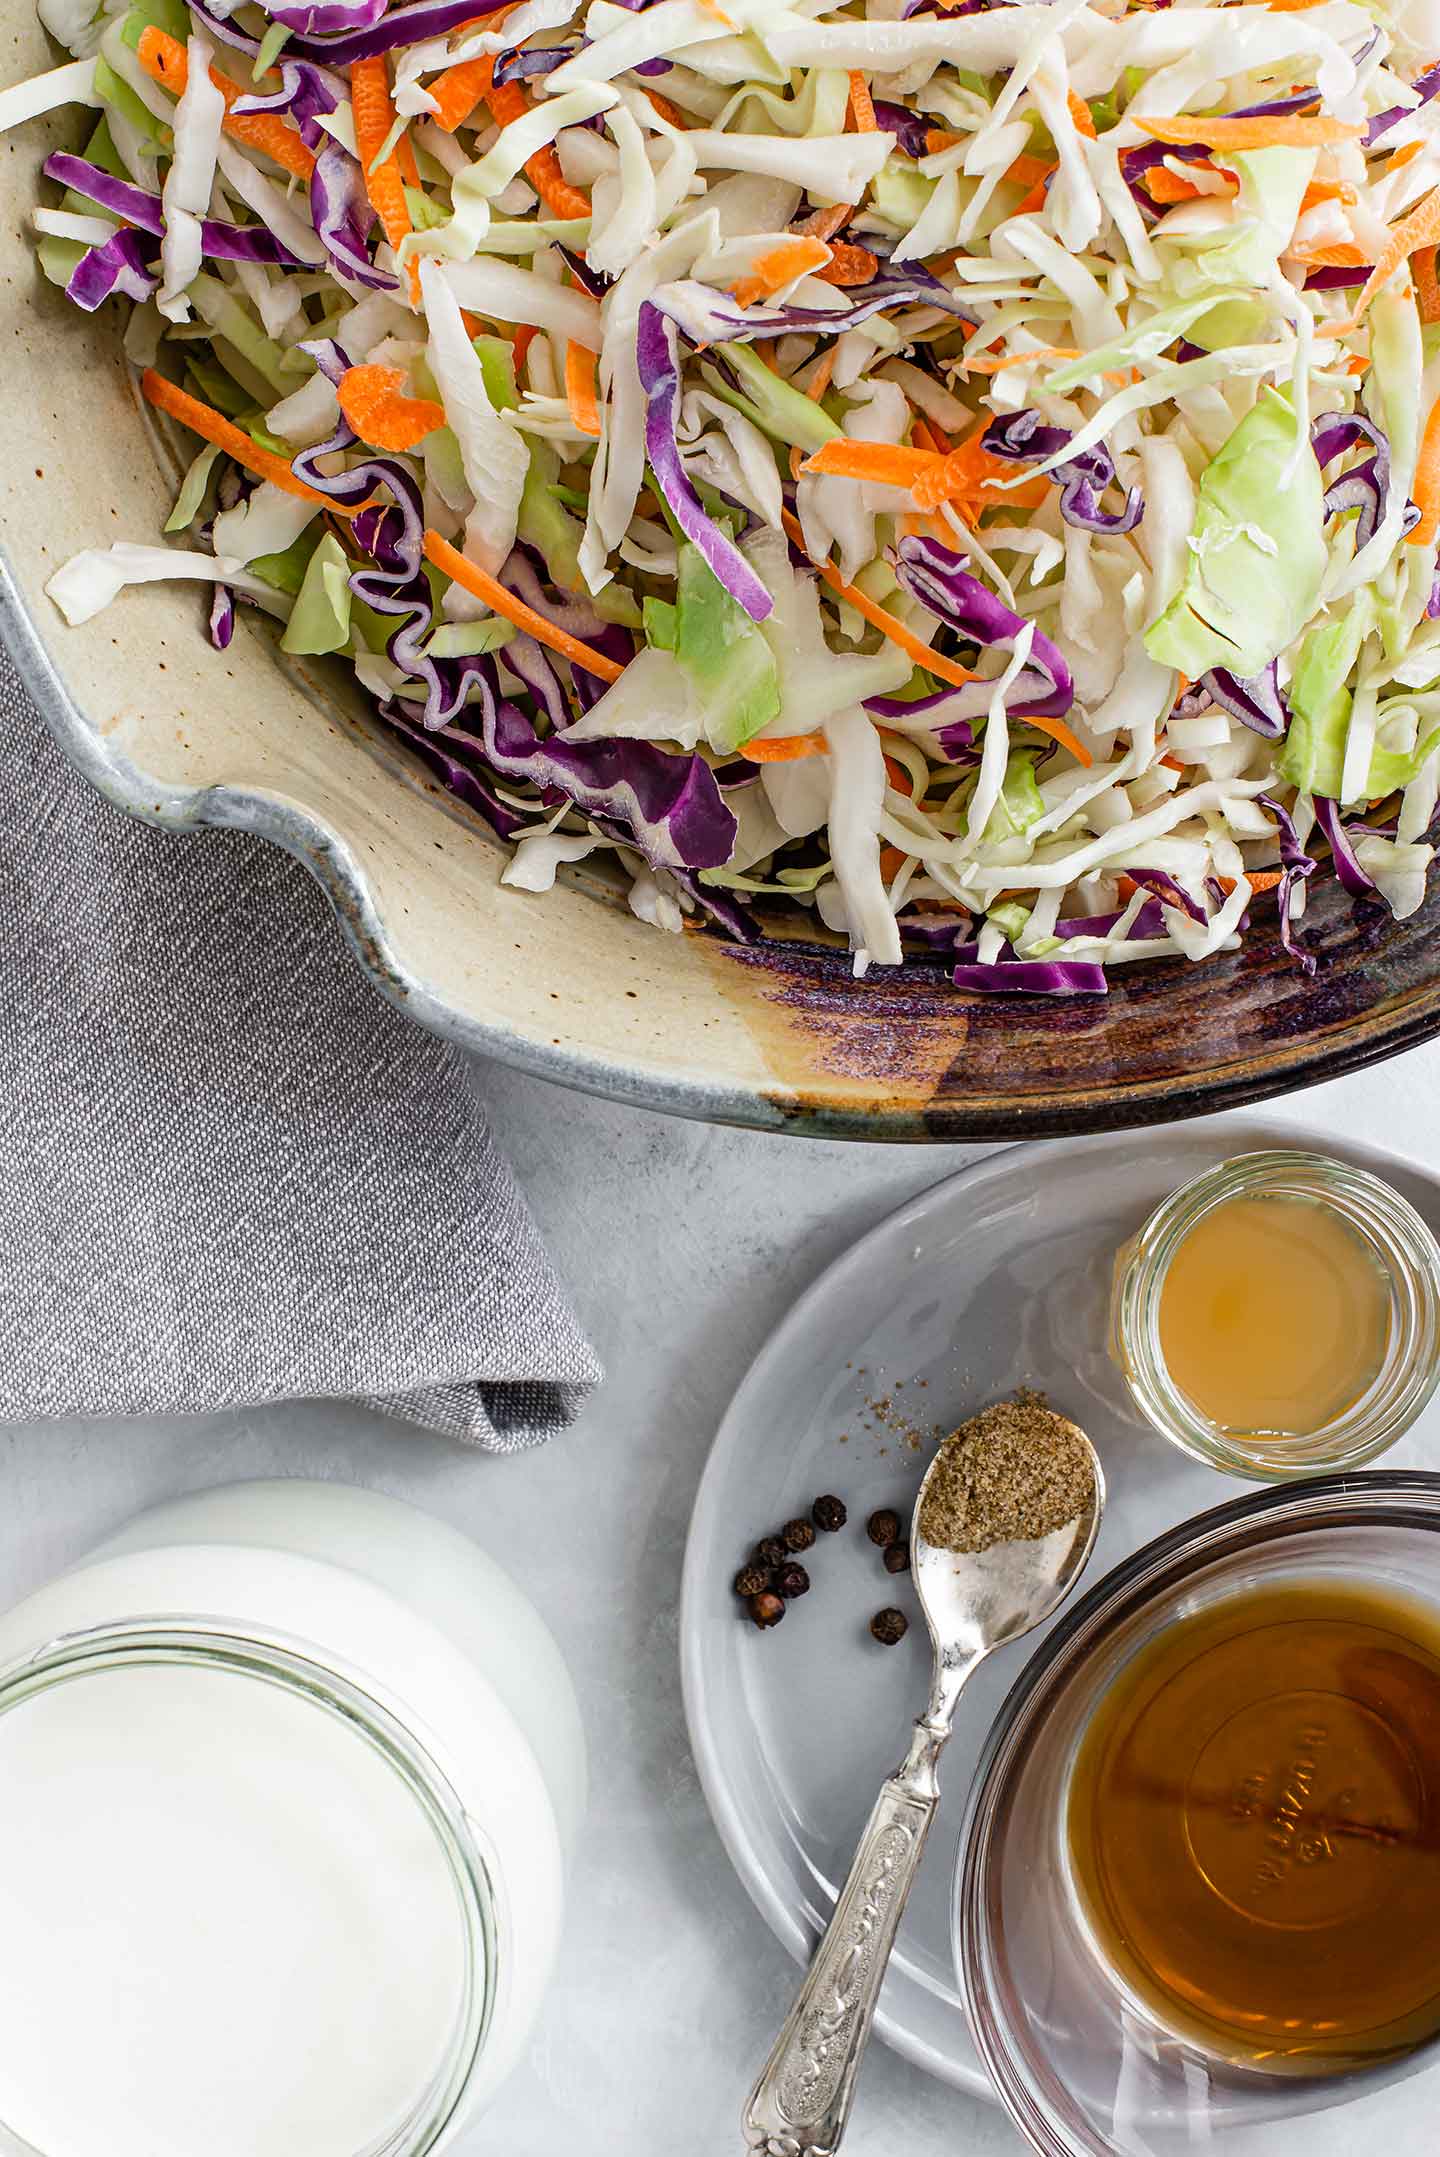 Top down view of ingredients for this summery vegan coleslaw recipe. Coleslaw mix, aquafaba mayo, maple syrup, apple cider vinegar, celery salt, and black pepper are displayed.